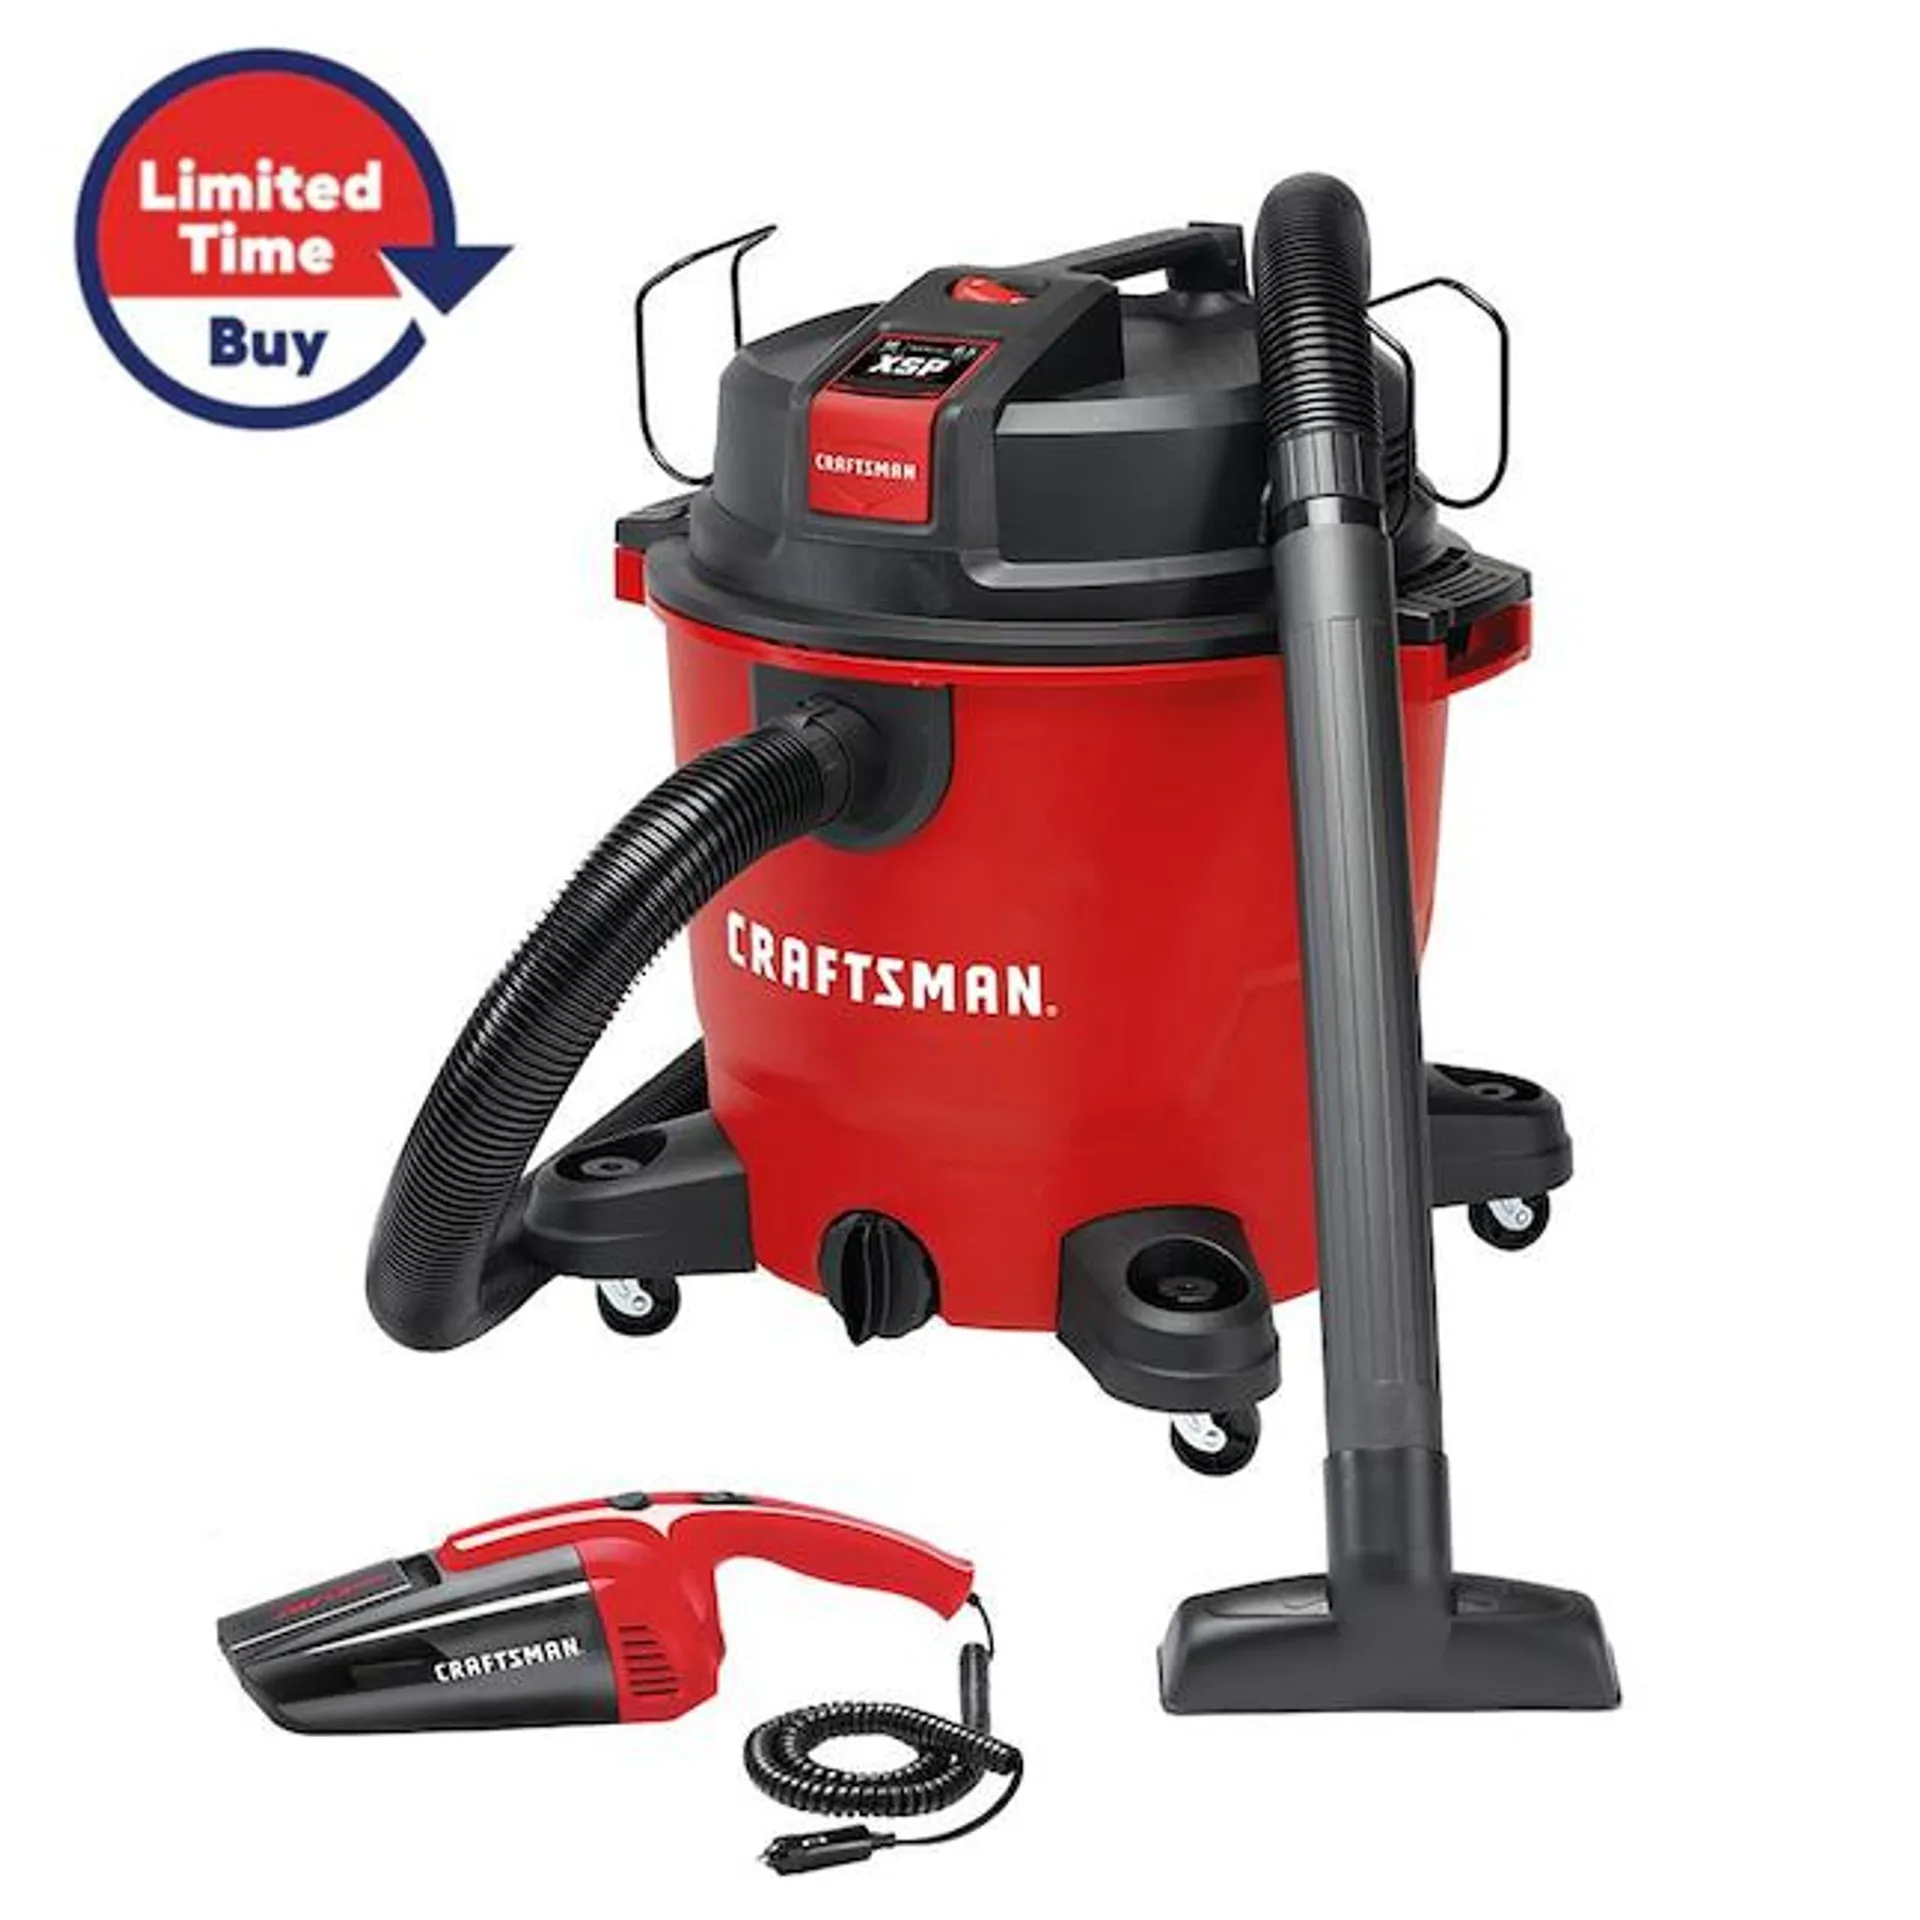 CRAFTSMAN Bonus 12V Car Vacuum 16-Gallons 6.5-HP Corded Wet/Dry Shop Vacuum with Accessories Included